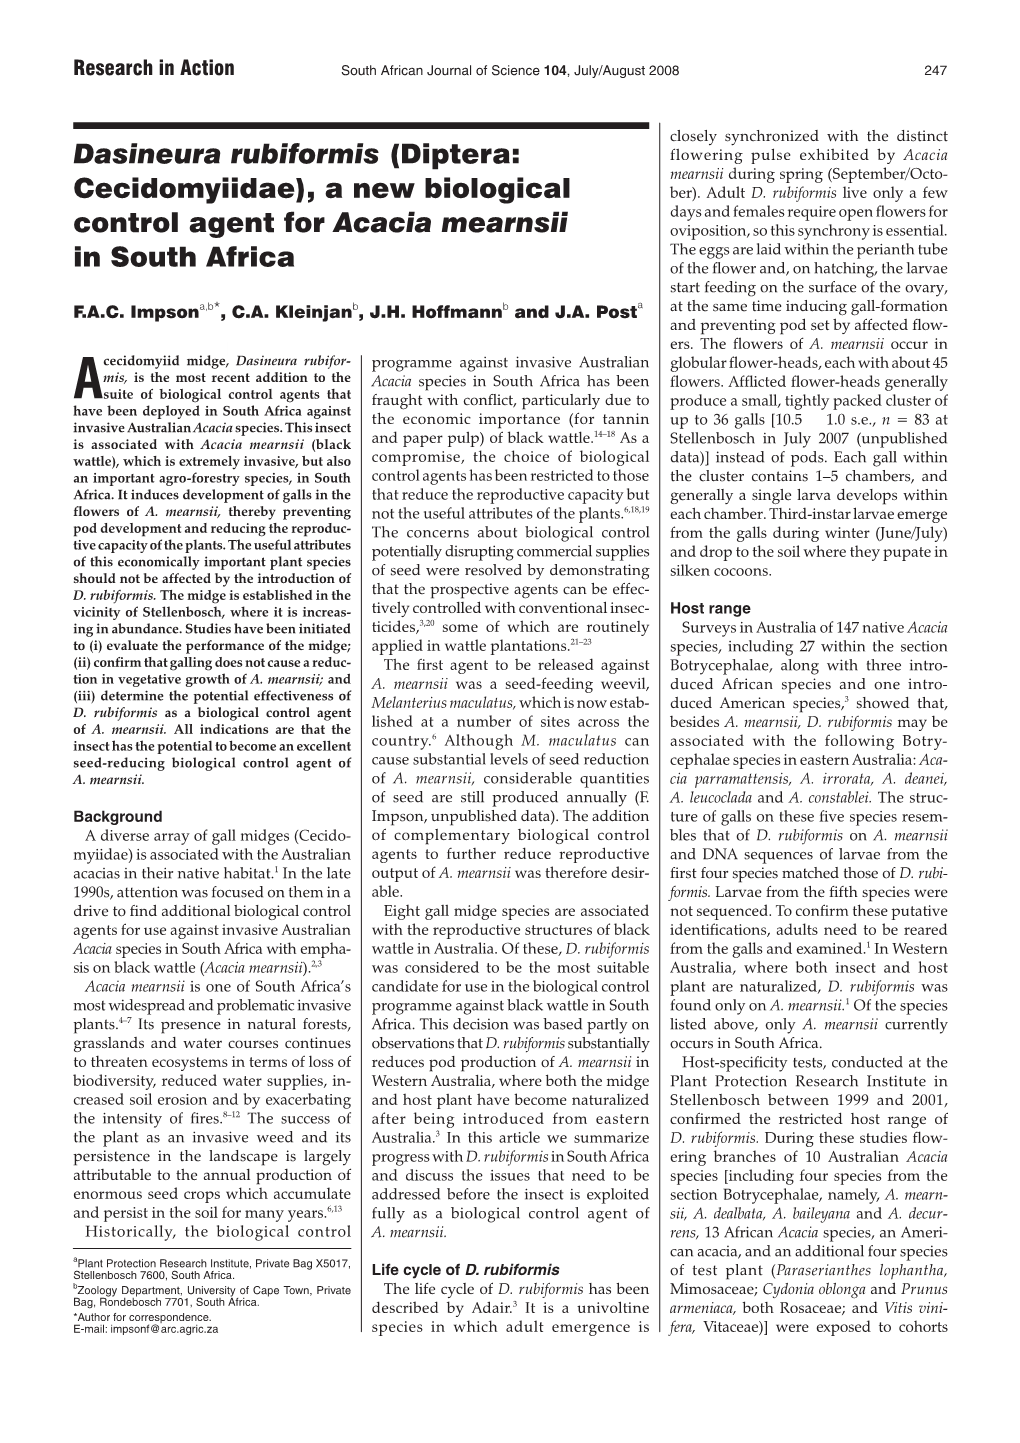 A New Biological Control Agent for Acacia Mearnsii in South Africa